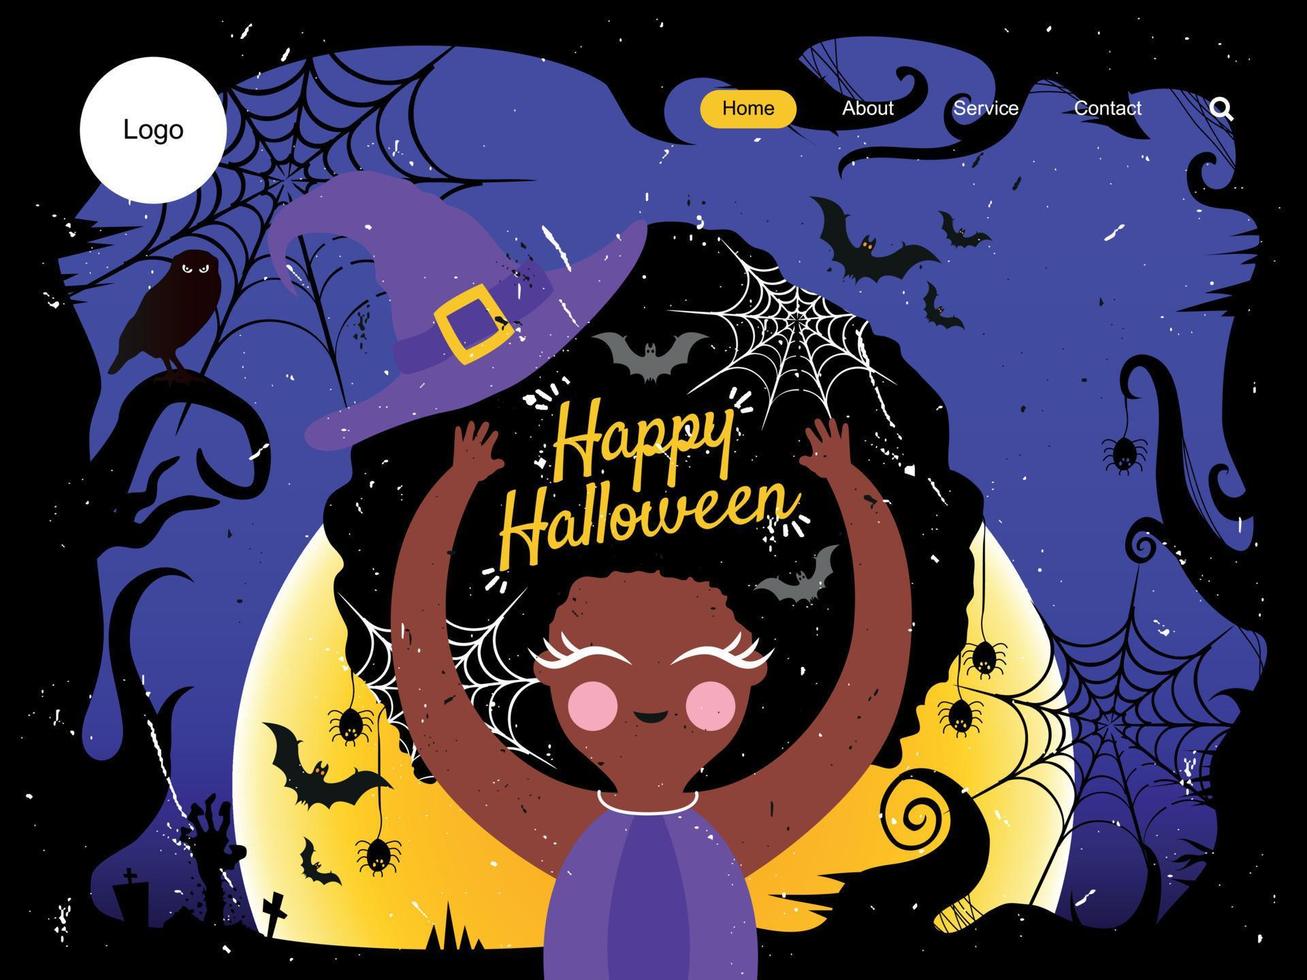 Halloween landing page with cute witch and friends vector